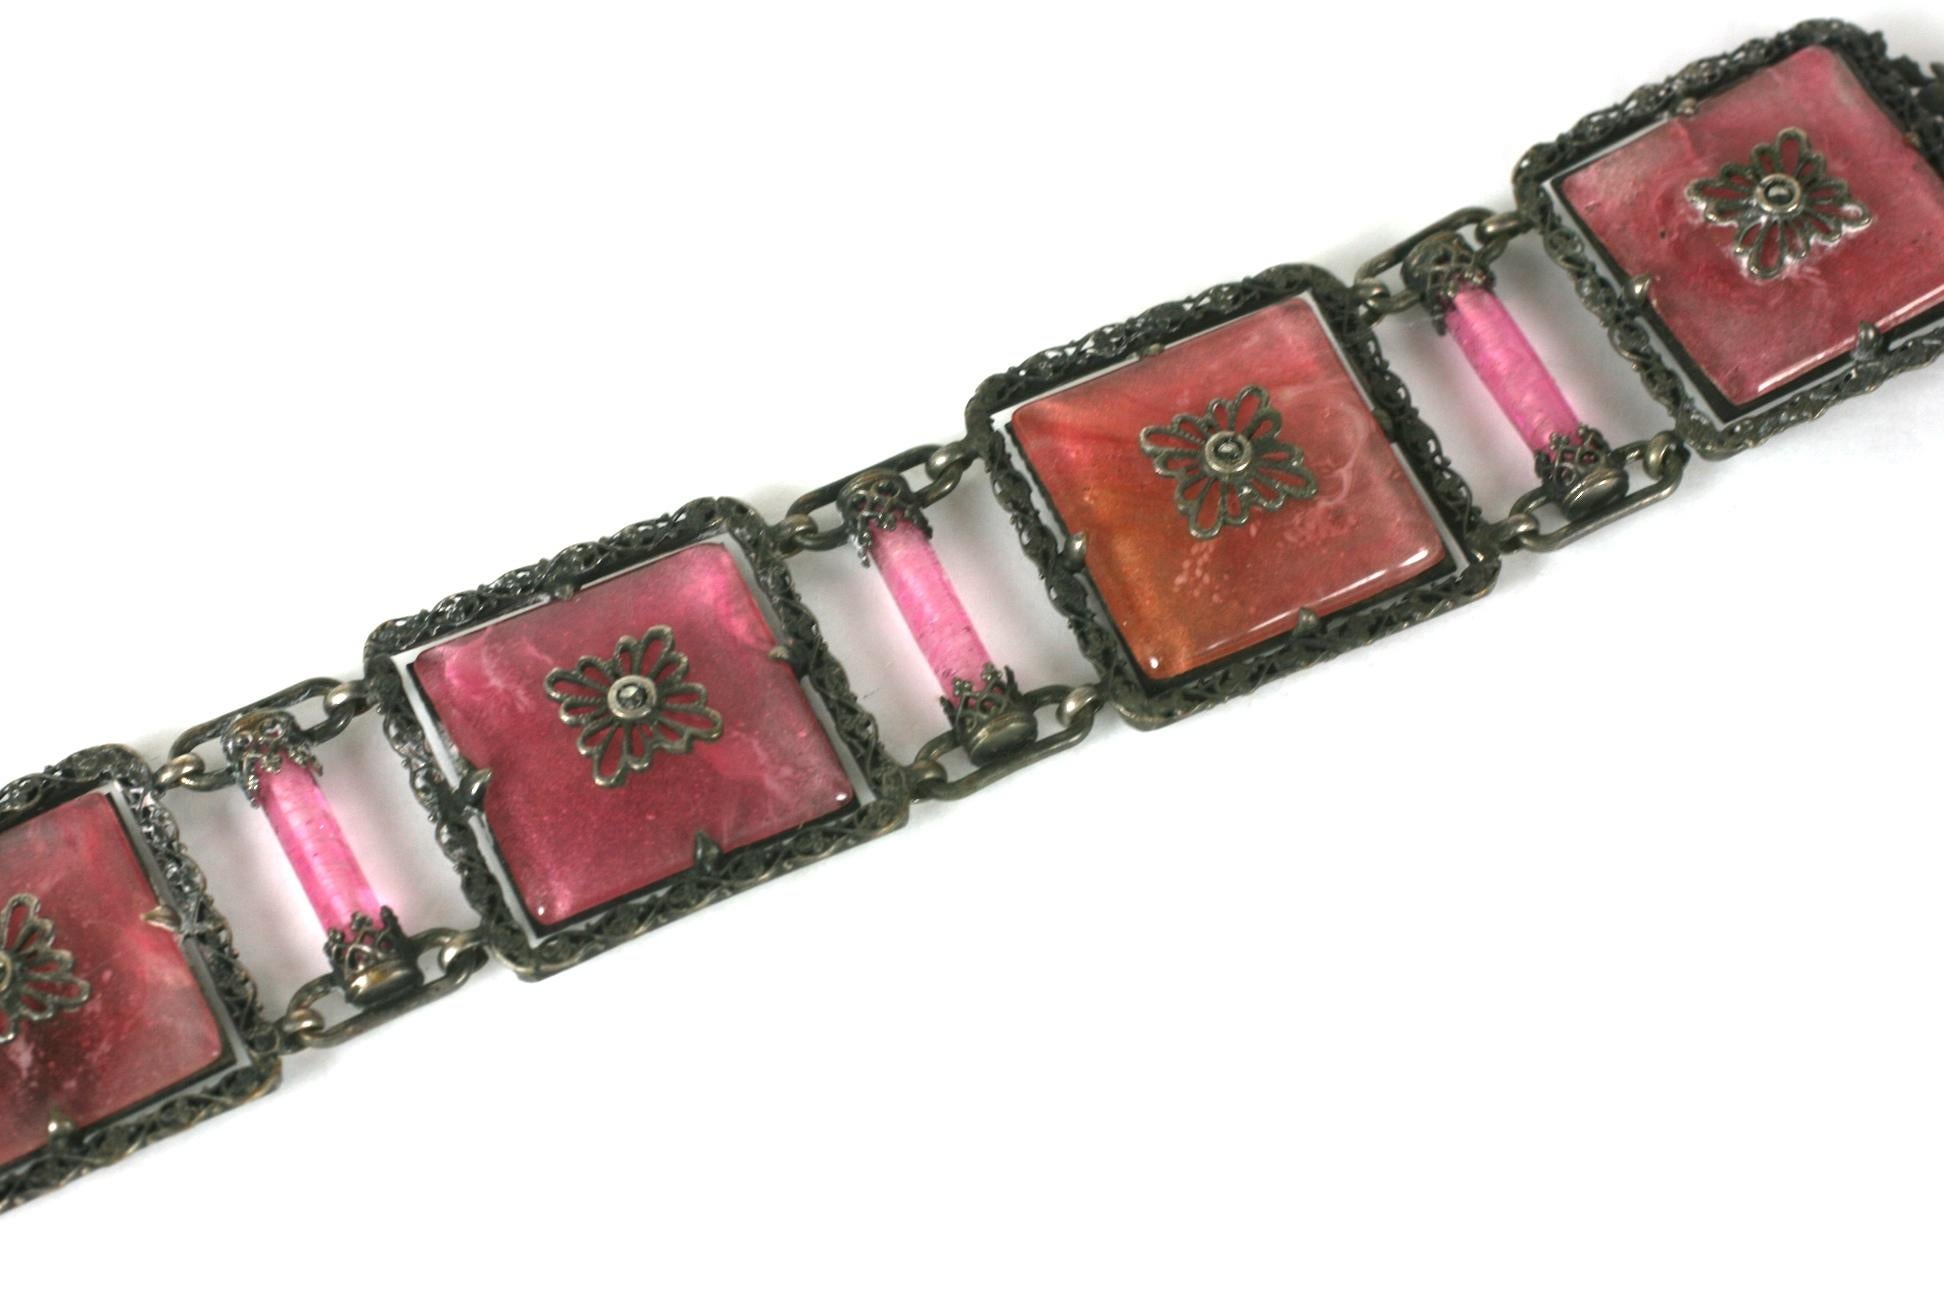 Exceptional French Art Deco faux rose quartz pate de verre and marcasite square panel link bracelet. Set in antiqued silvered metal, with marcasite accented floral motifs.
Good Condition. Small chip on one panel. 8